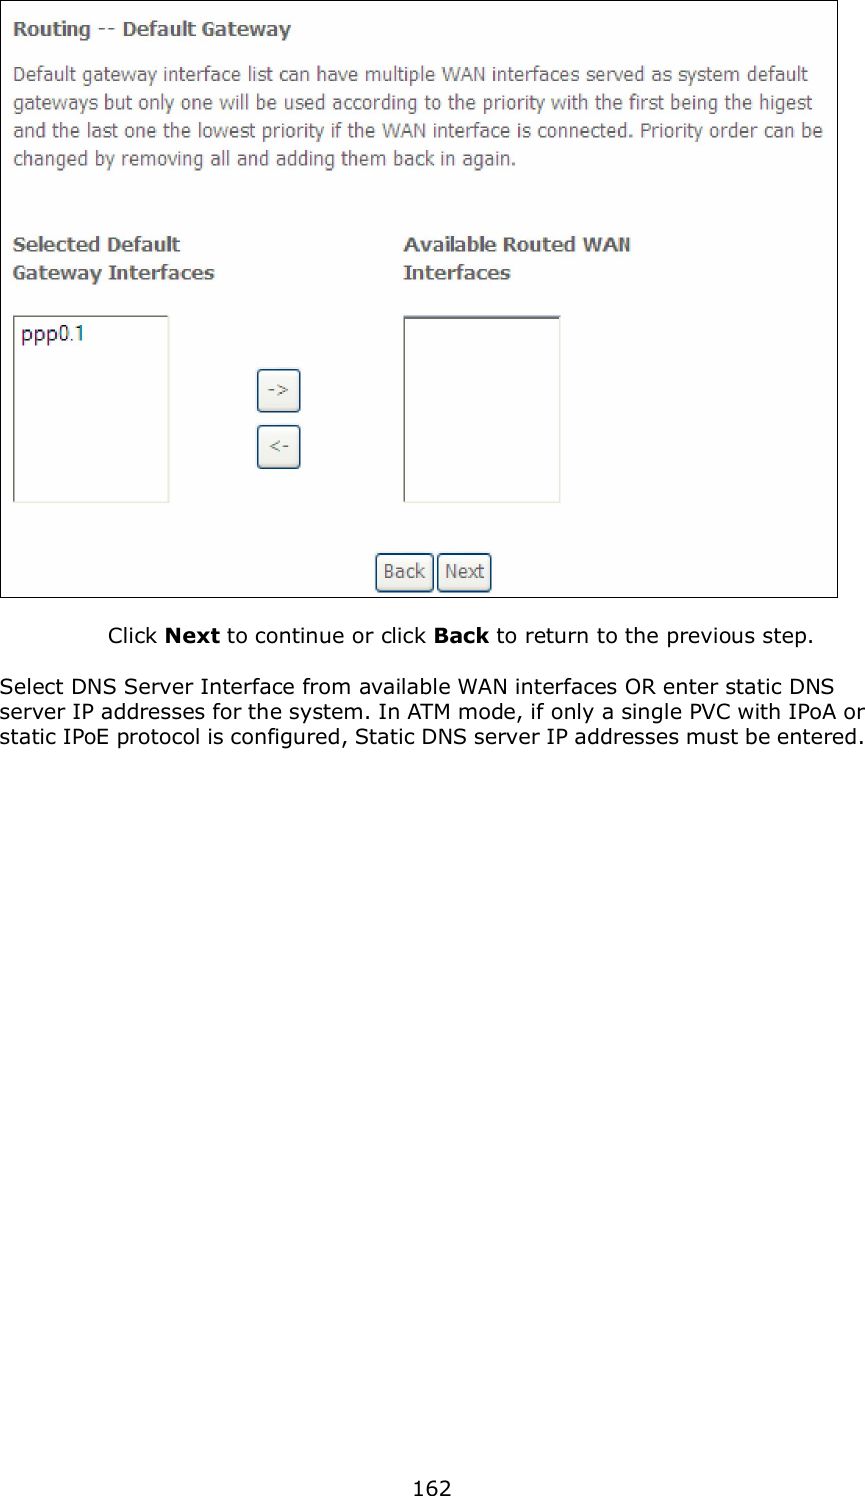  162     Click Next to continue or click Back to return to the previous step.  Select DNS Server Interface from available WAN interfaces OR enter static DNS server IP addresses for the system. In ATM mode, if only a single PVC with IPoA or static IPoE protocol is configured, Static DNS server IP addresses must be entered.   